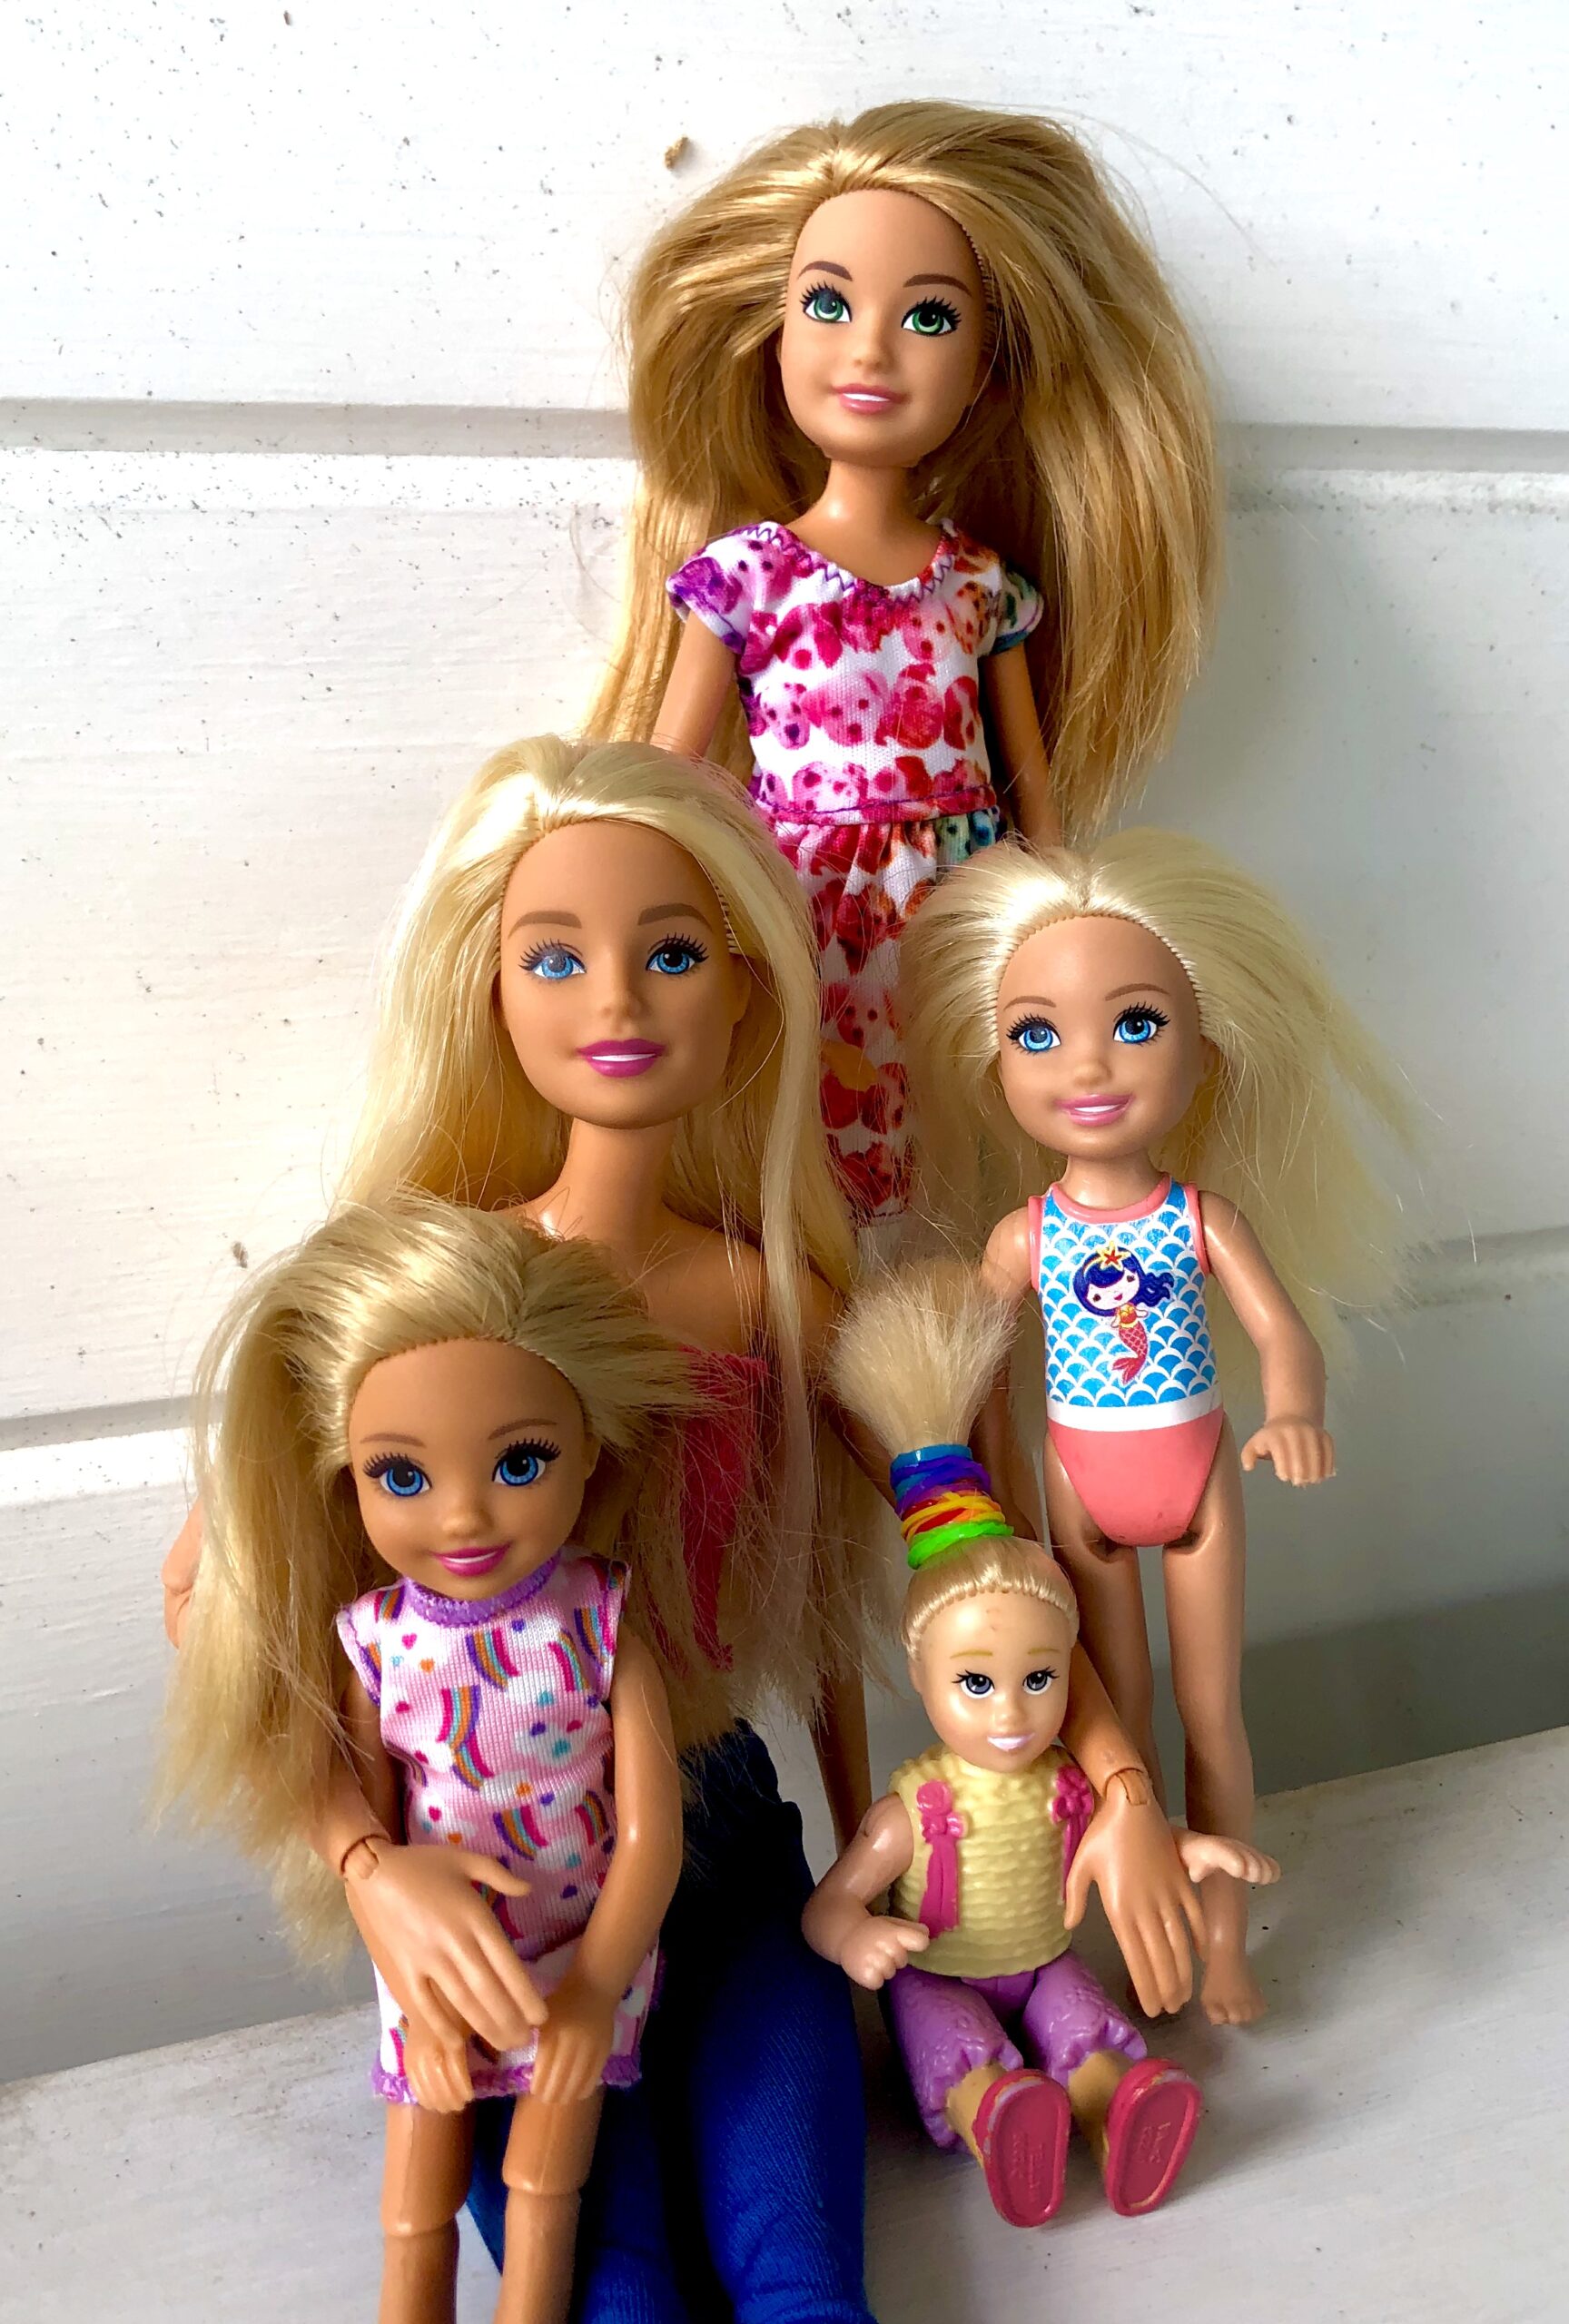 Picture of 5 Barbies for the Barbie Life Story.